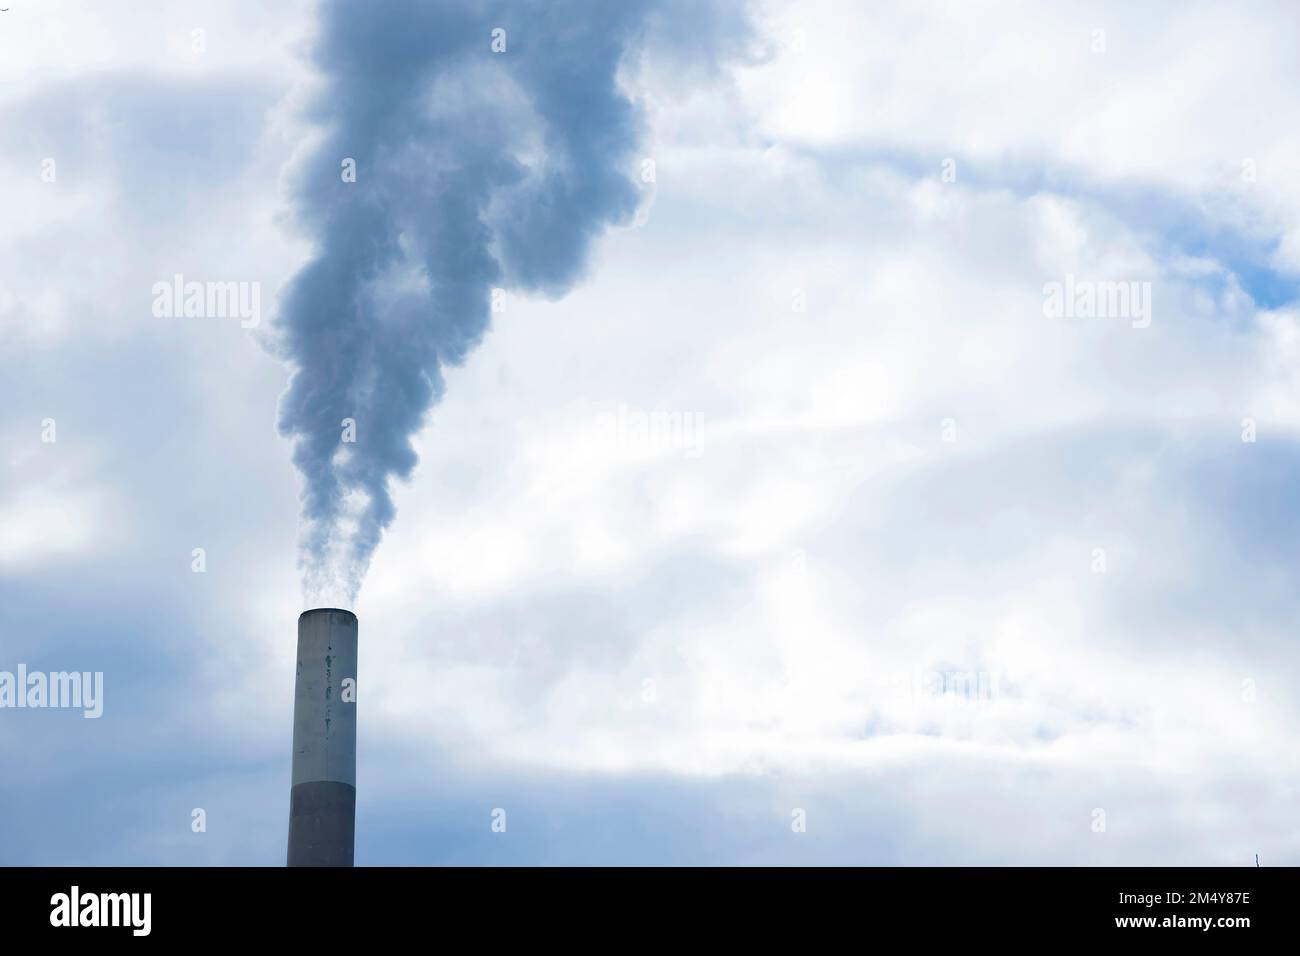 Industrial chimney, thermal power plant, pollution in the air, steam cooling tower in Graz, Styria region, Austria. Stock Photo